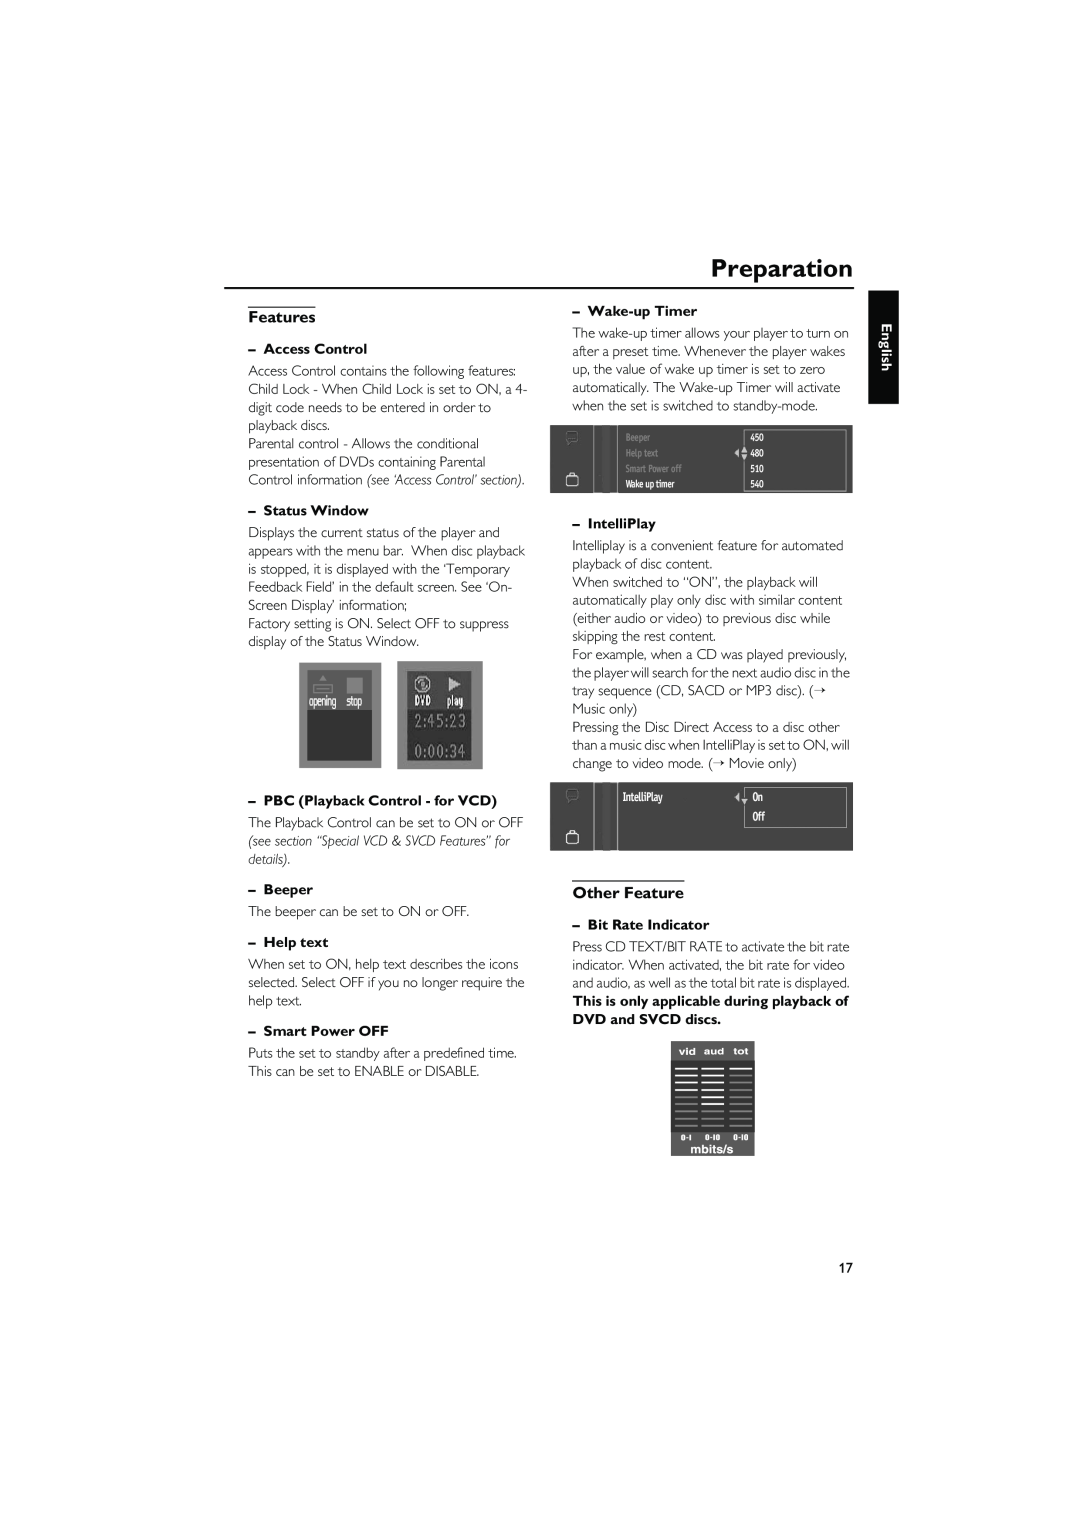 Yamaha DVD-C940 owner manual Features, Other Feature, Preparation, English 